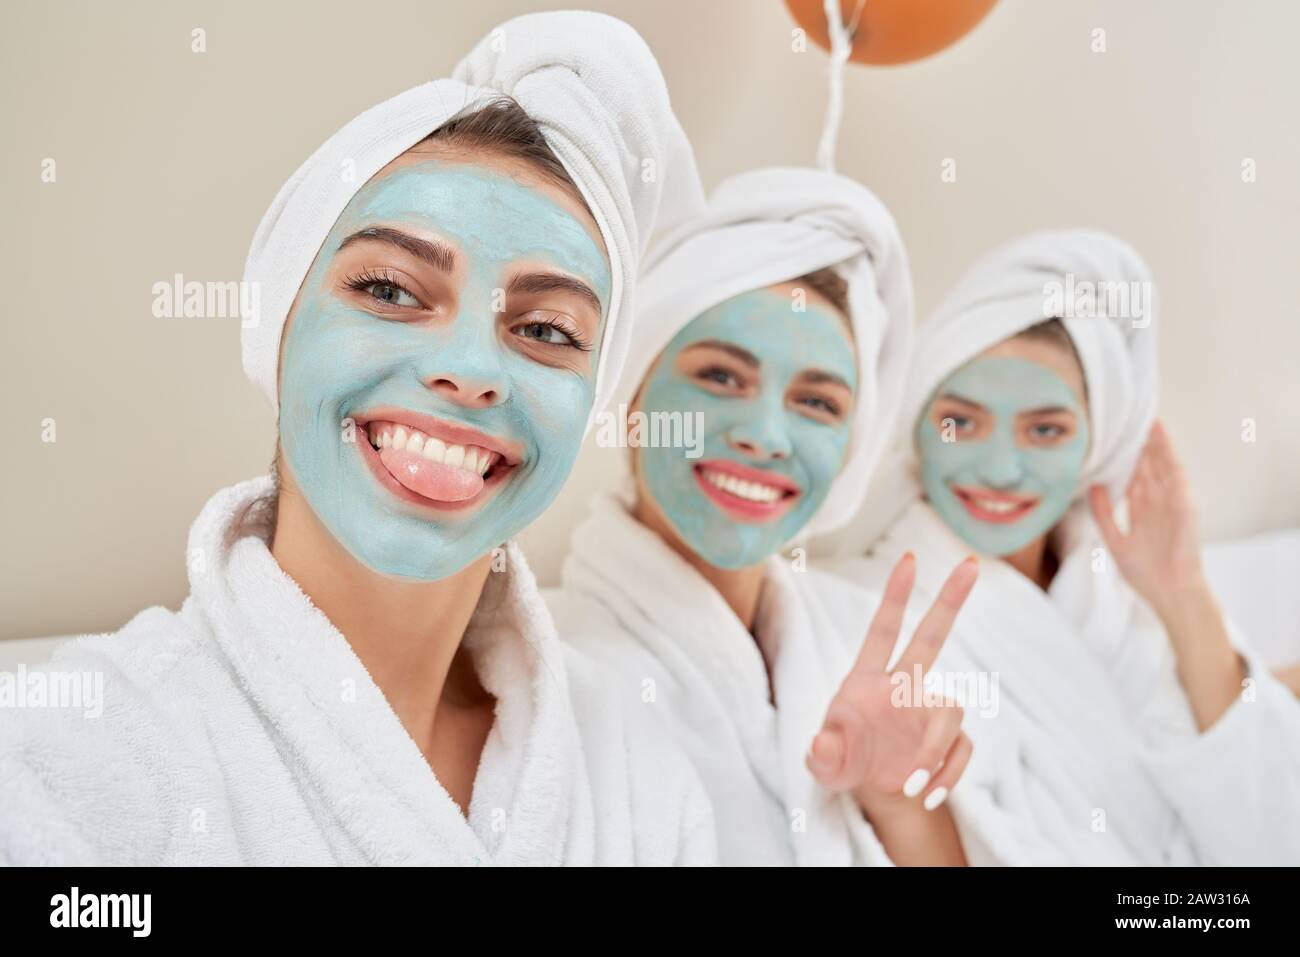 Close up of smiling group of girls with cosmetic masks, in towels on heads and bathrobes having fun at home. Three pretty girls taking selfie after shower in bedroom. Concept of friendship, skincare. Stock Photo